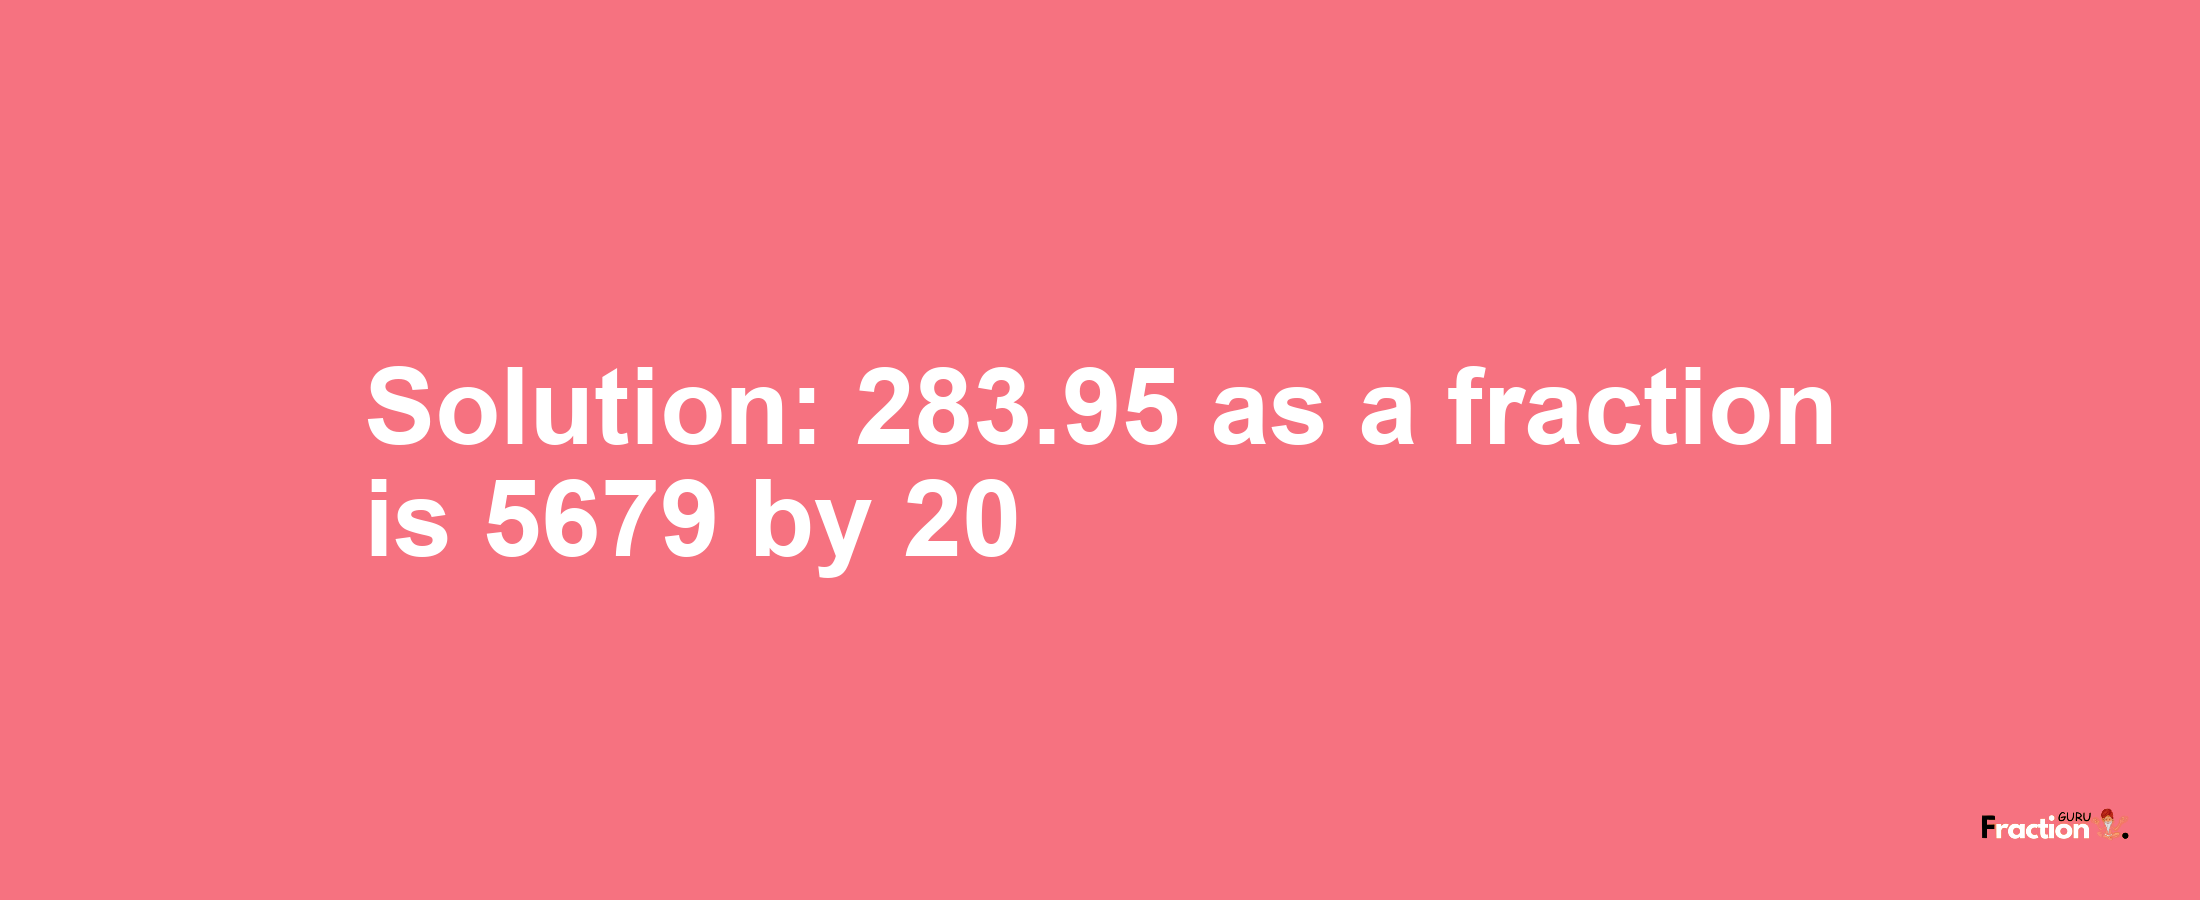 Solution:283.95 as a fraction is 5679/20